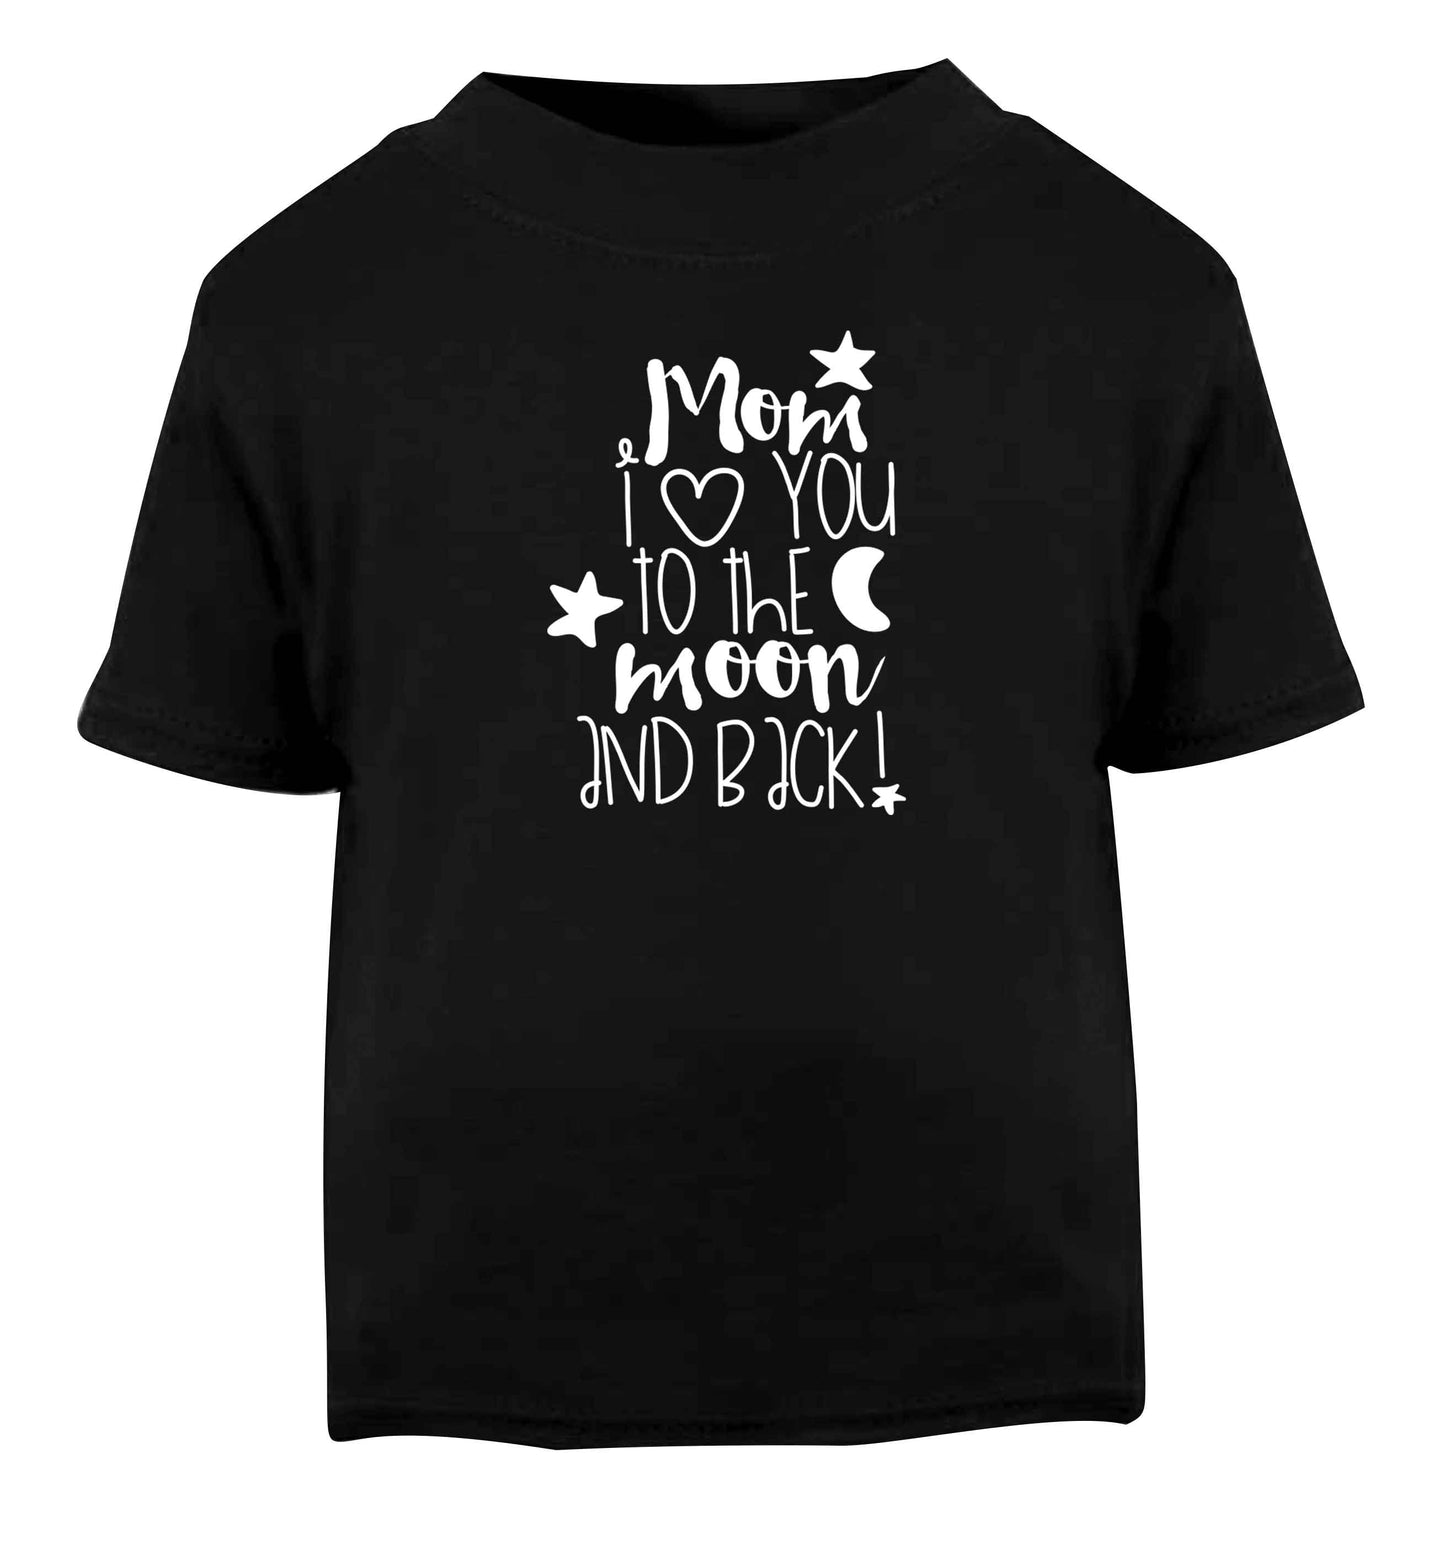 Mom I love you to the moon and back Black baby toddler Tshirt 2 years